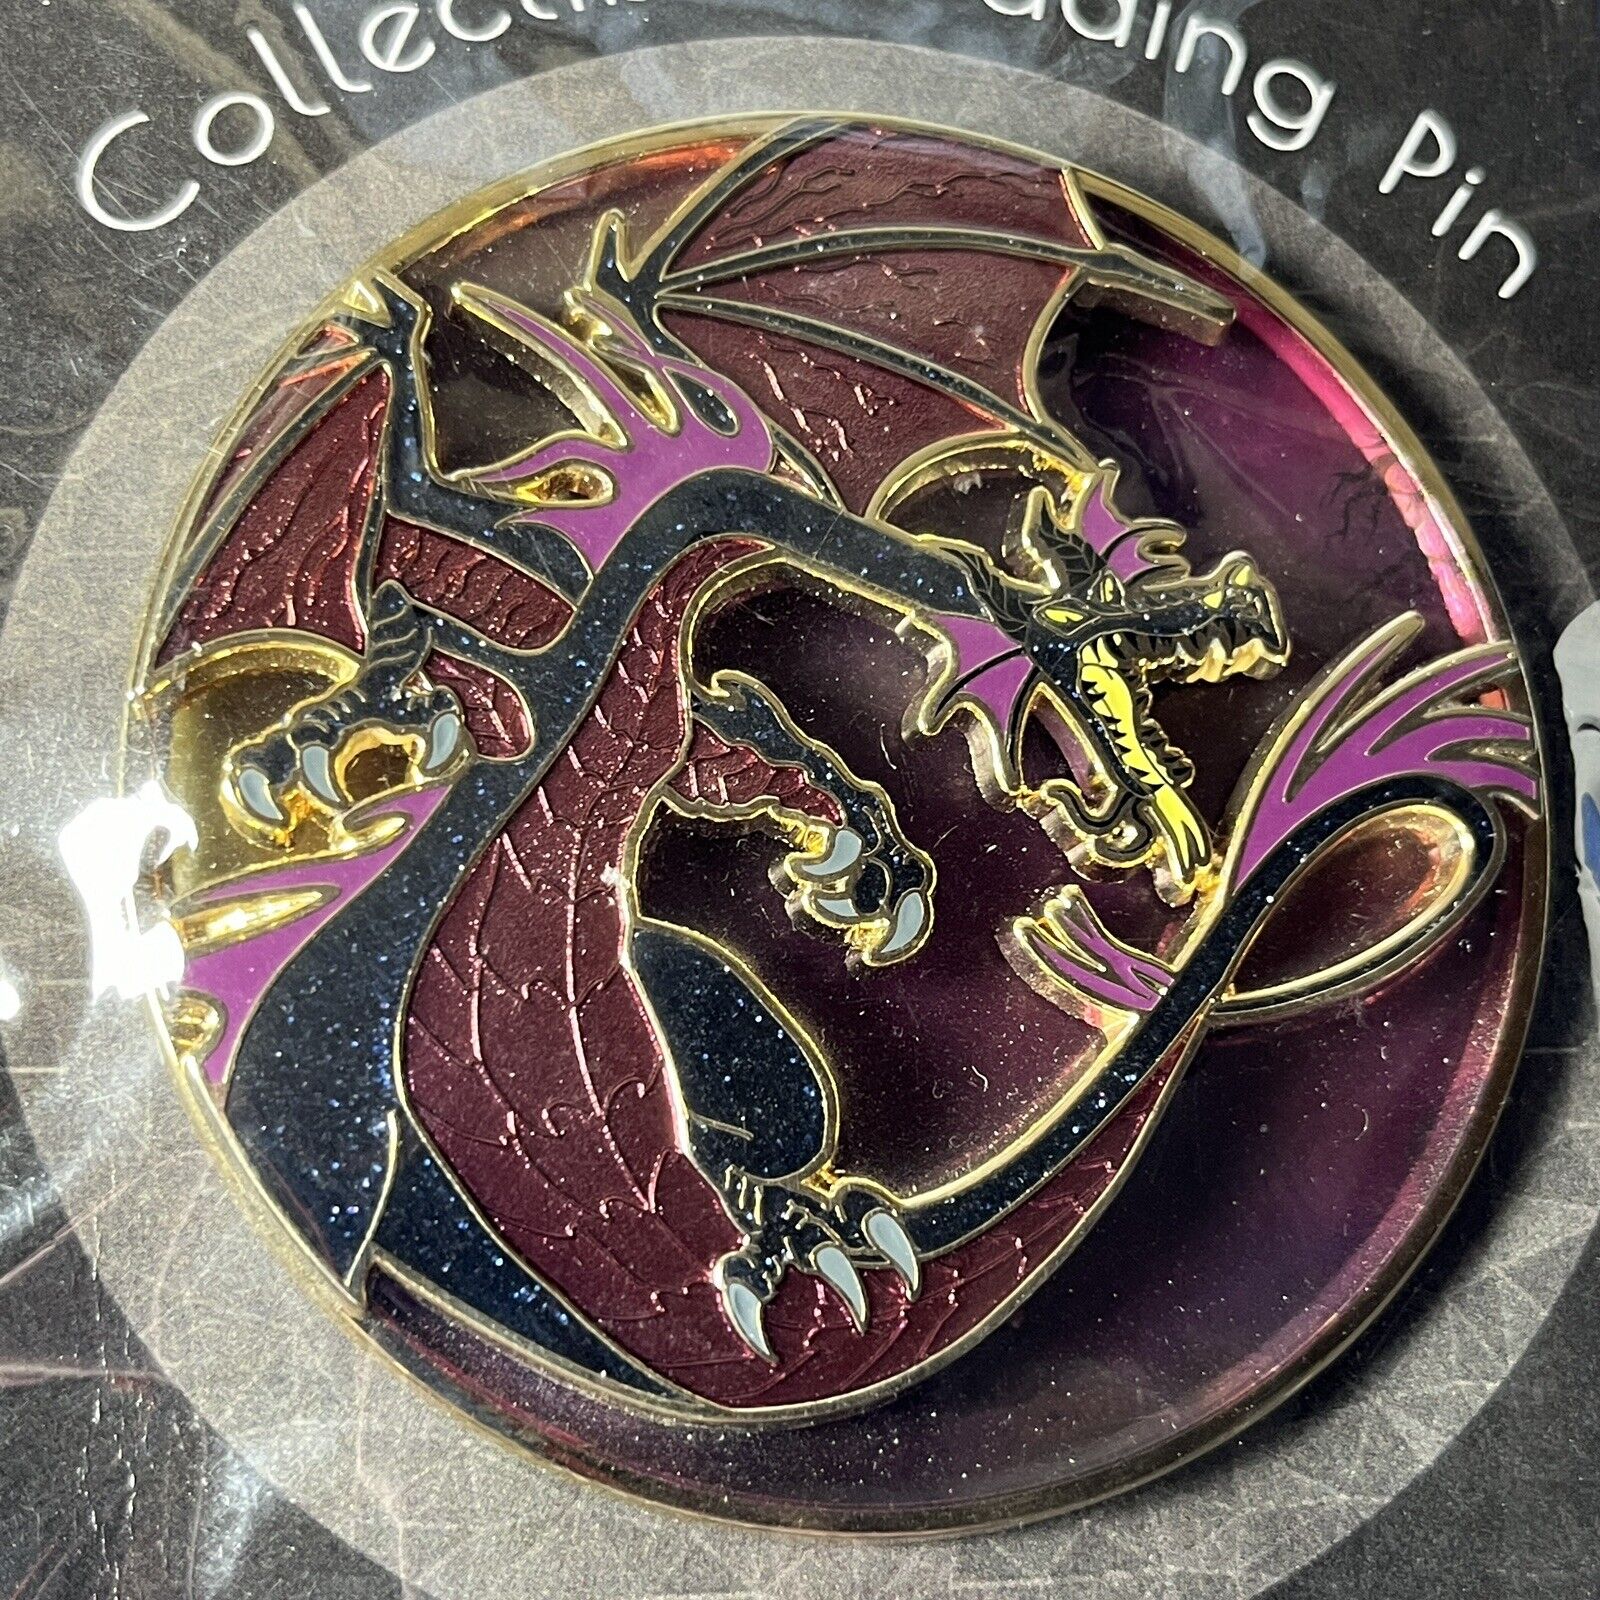 Disney Artland Maleficent Dragon Frosted Glass LE 30 PP Pin Sleeping Beauty  F01